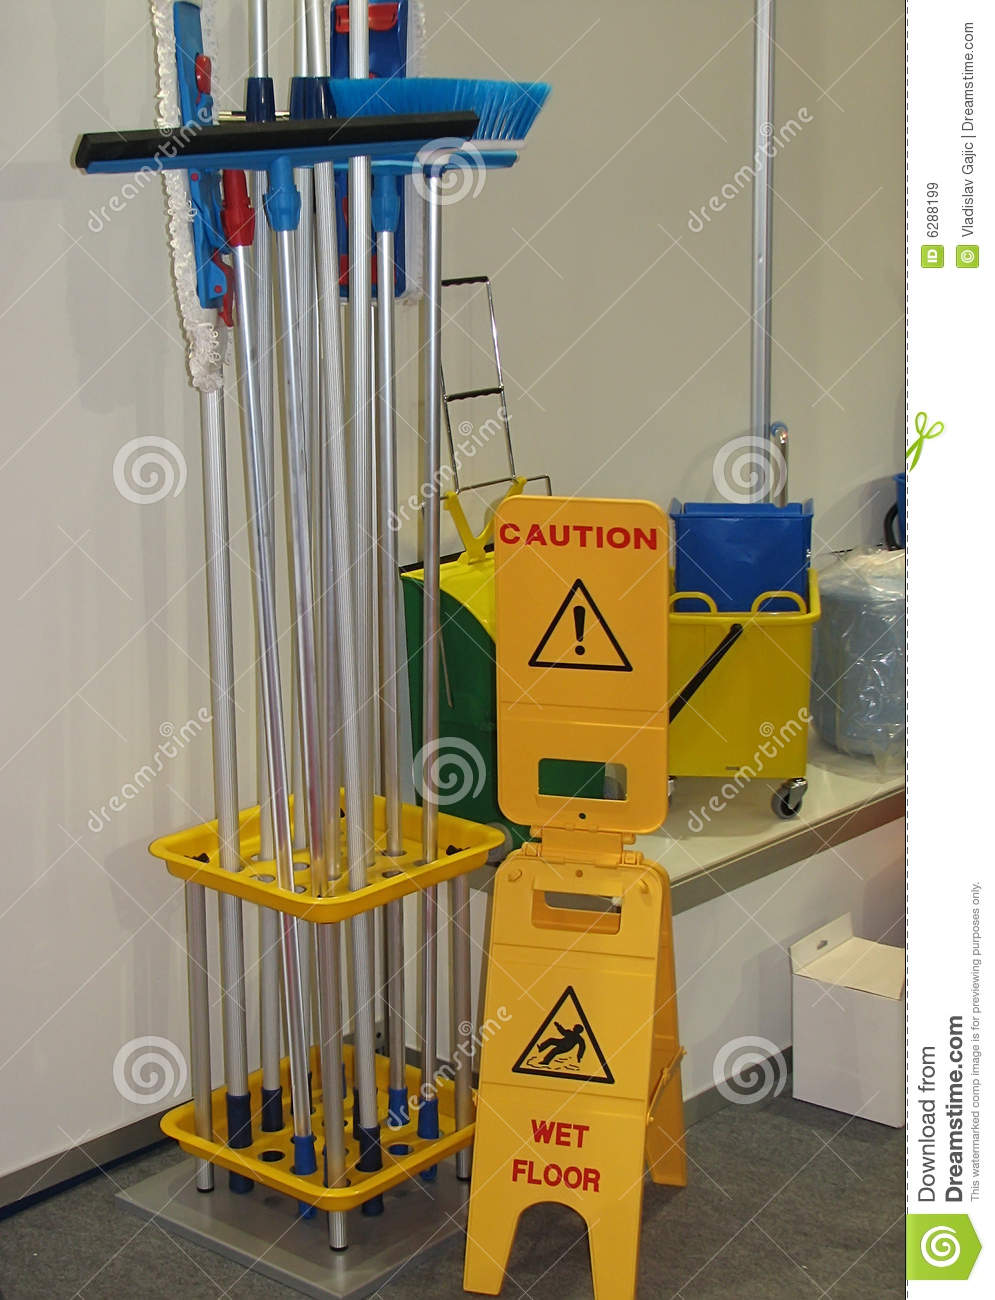 Cleaning Equipment Royalty Free Stock Images   Image  6288199